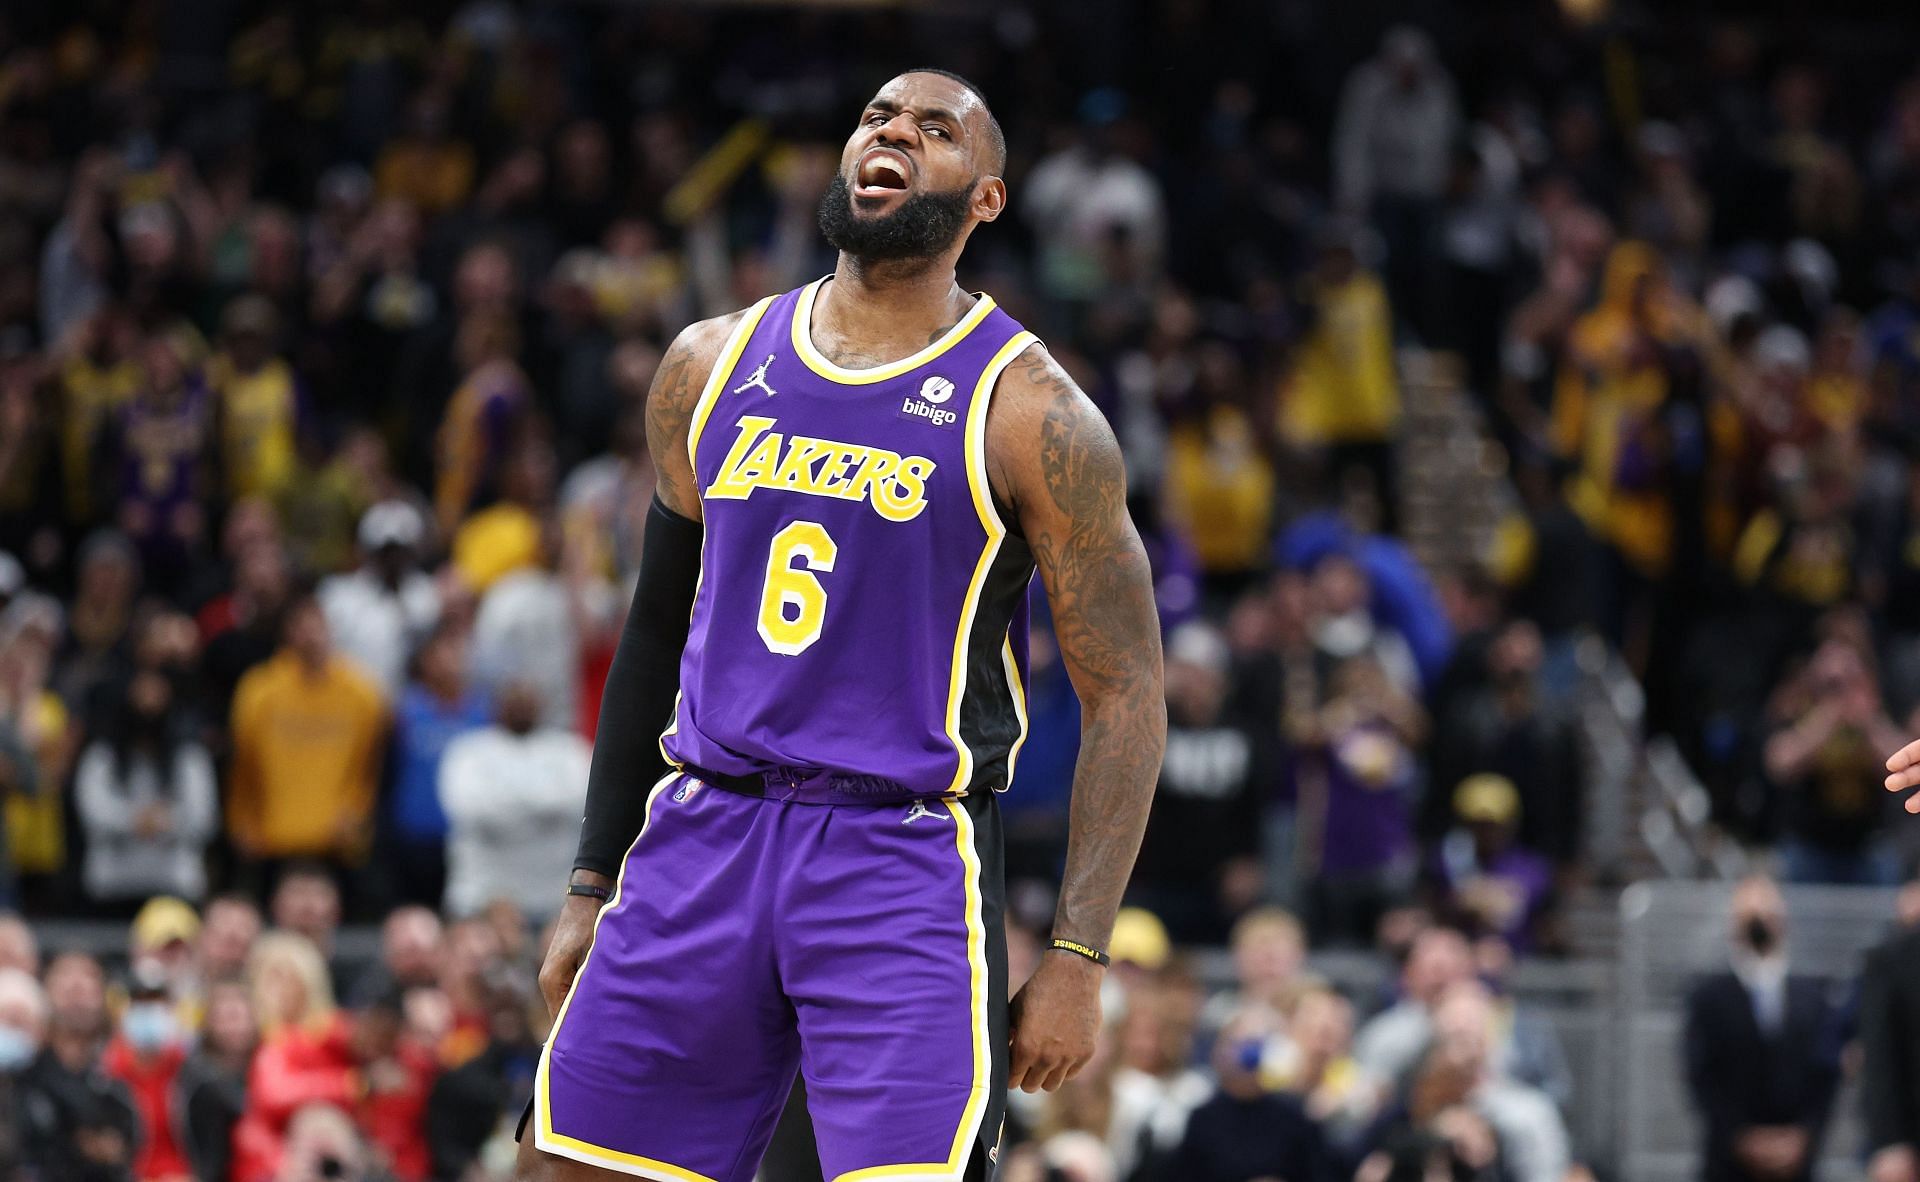 LeBron James of the Los Angeles Lakers celebrates in the 124-116 OT win against the Indiana Pacers